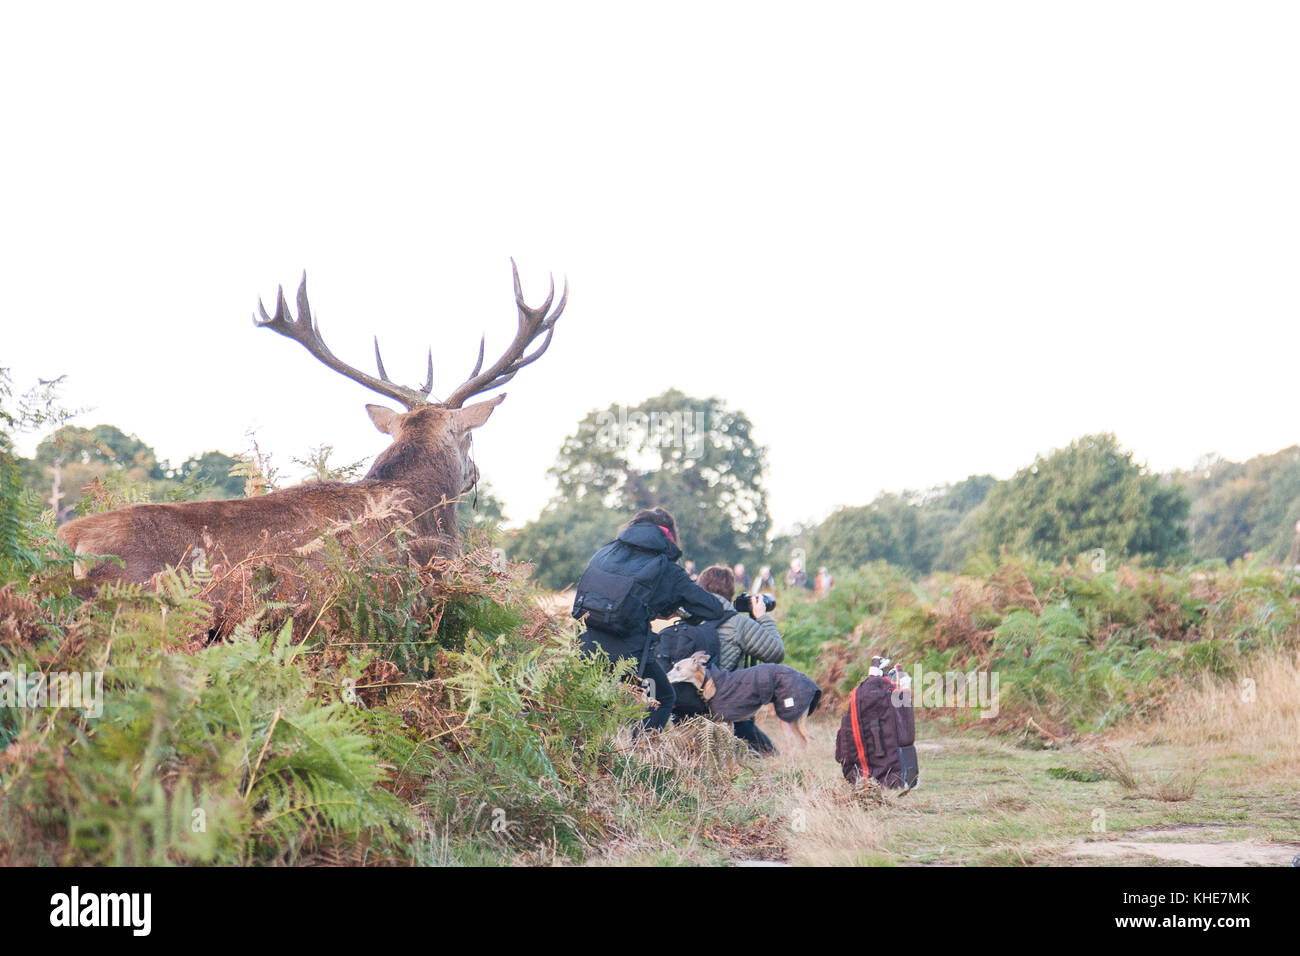 Richmond Park, London. Large red deer stag sneaks up on group of photographers. Stock Photo